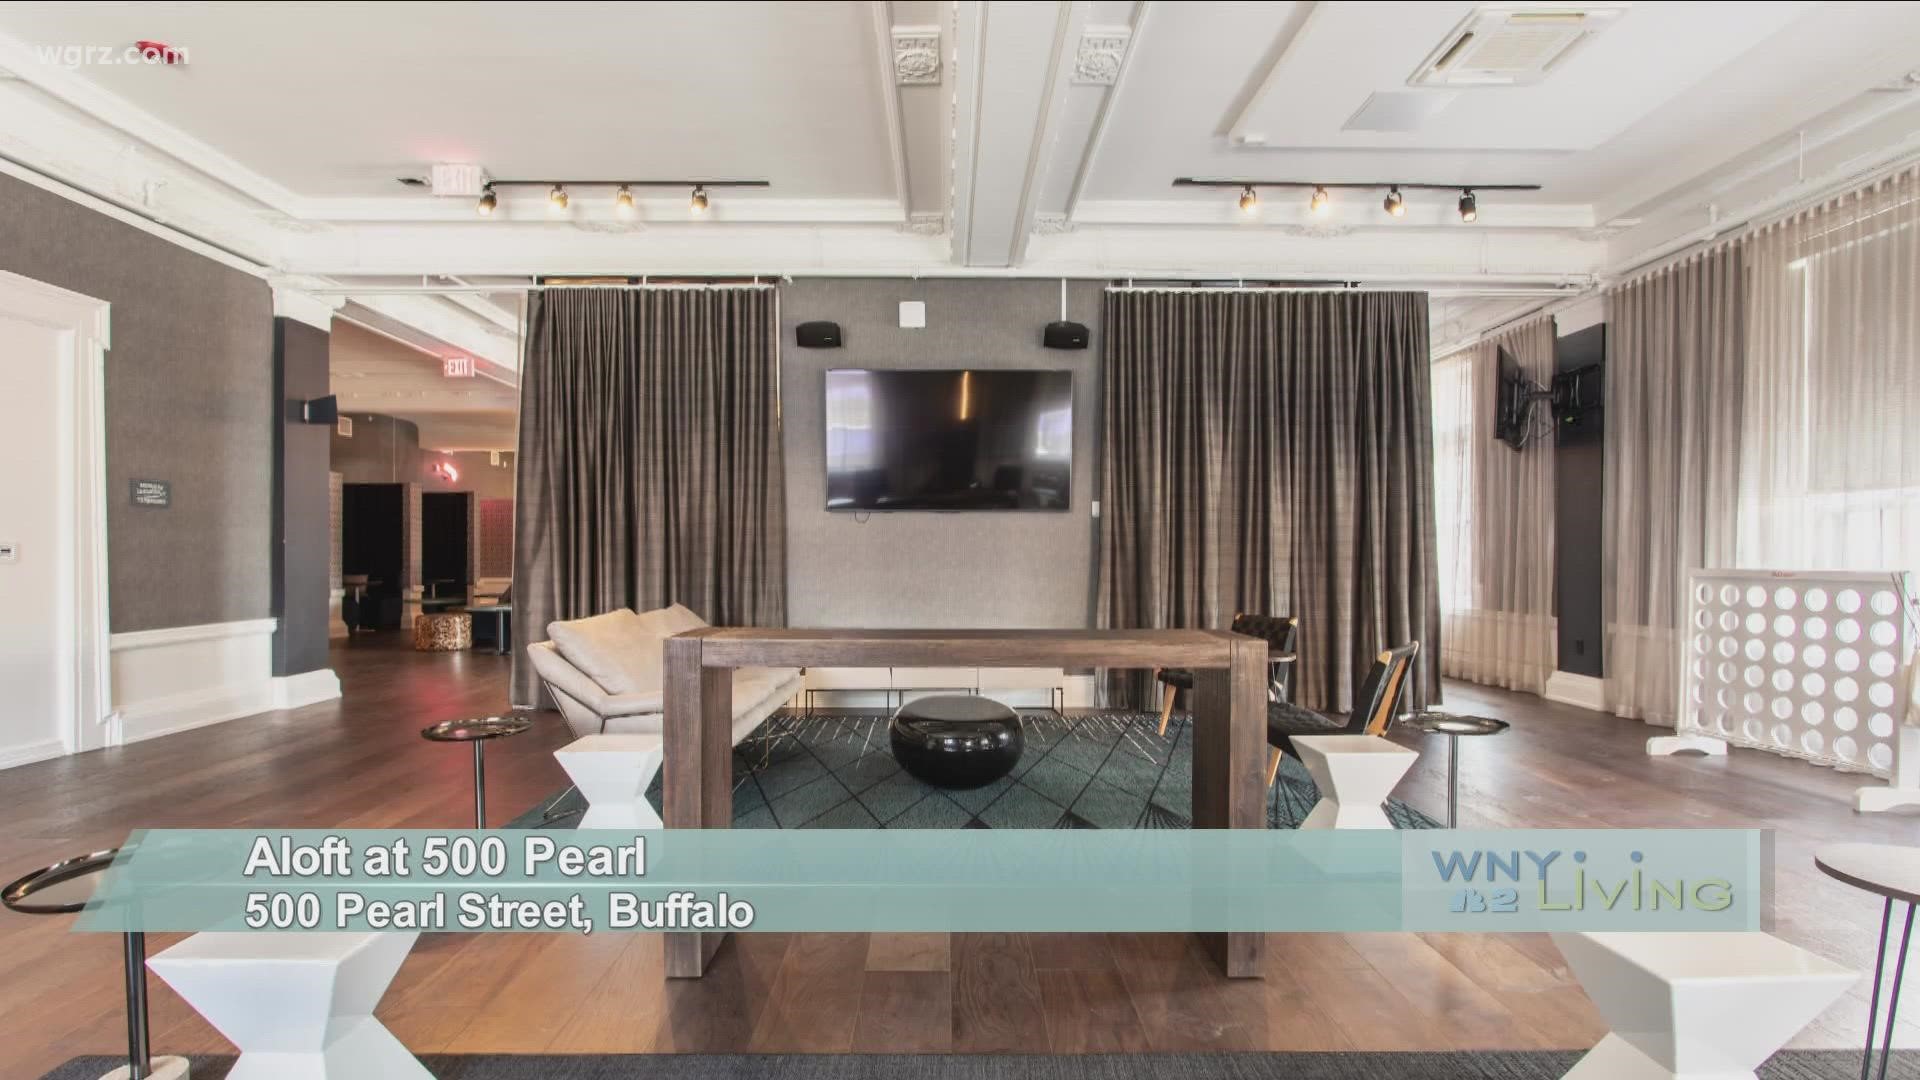 WNY Living - August 28 - Aloft at 500 Pearl (THIS VIDEO IS SPONSORED BY ALOFT AT 500 PEARL)